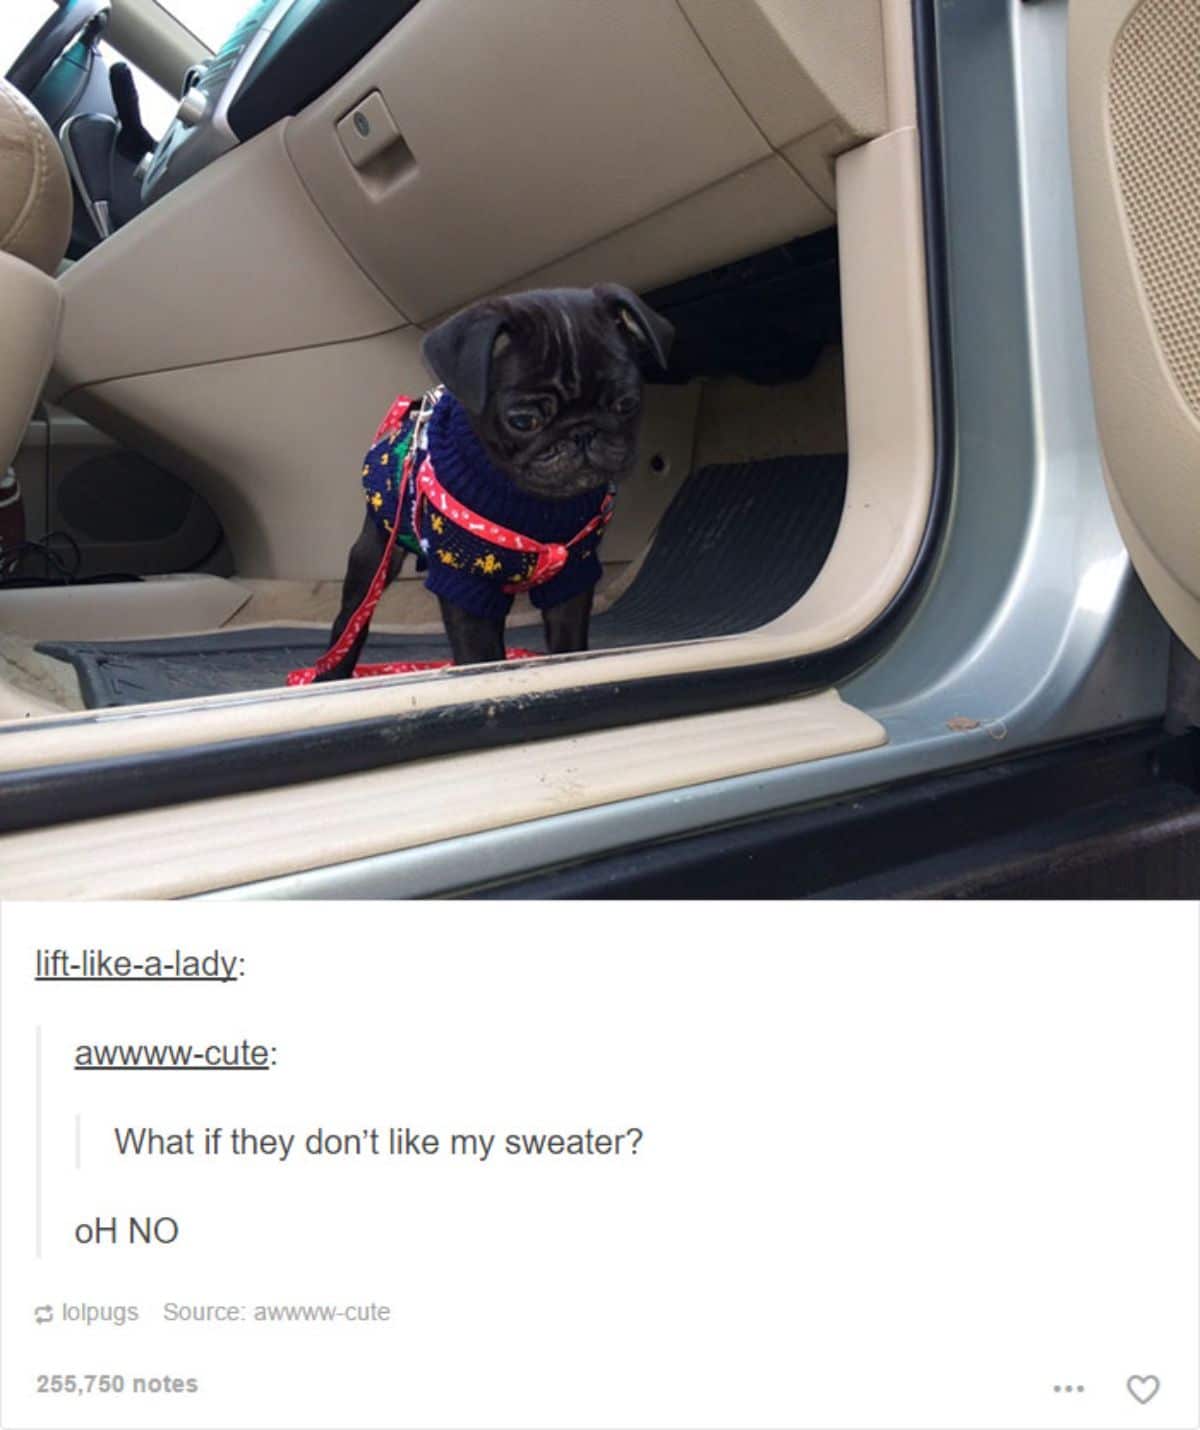 black pug on the floor of a car wearing blue bandana and red leash looking out of the open car door